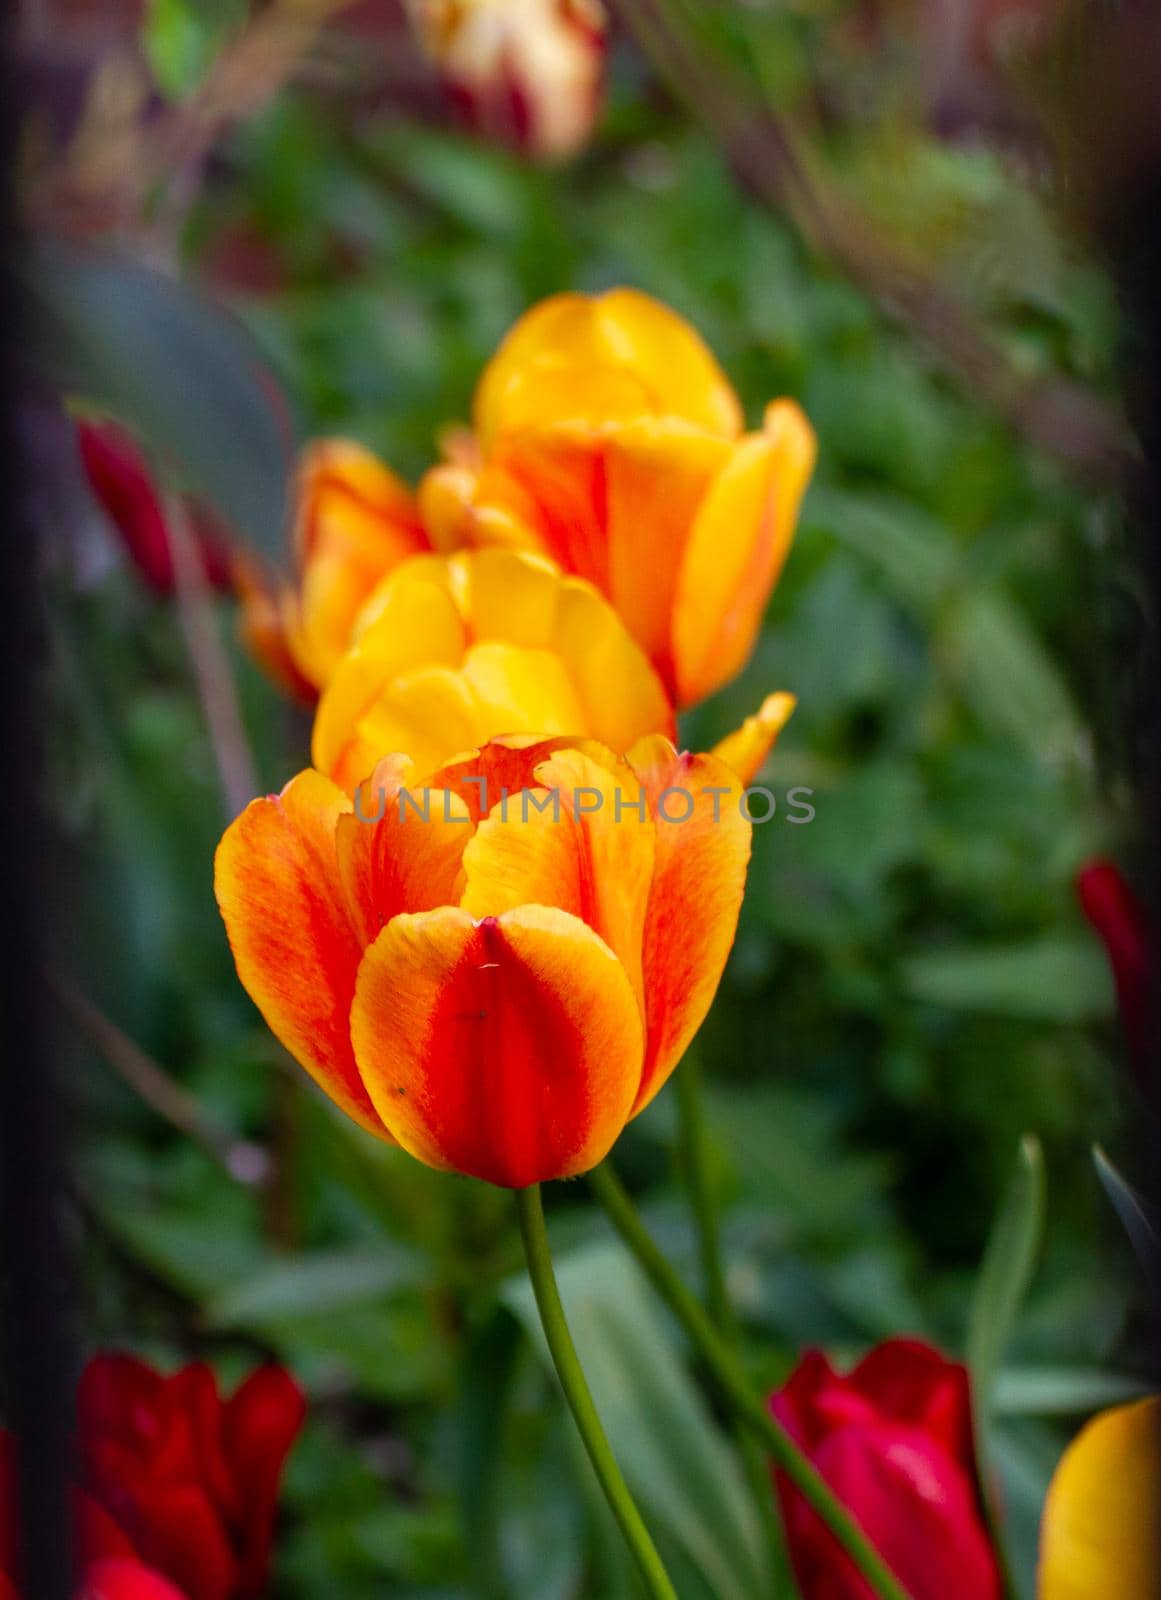 Close-Up Of Two Orange And Yellow Tulips by AlbertoPascual